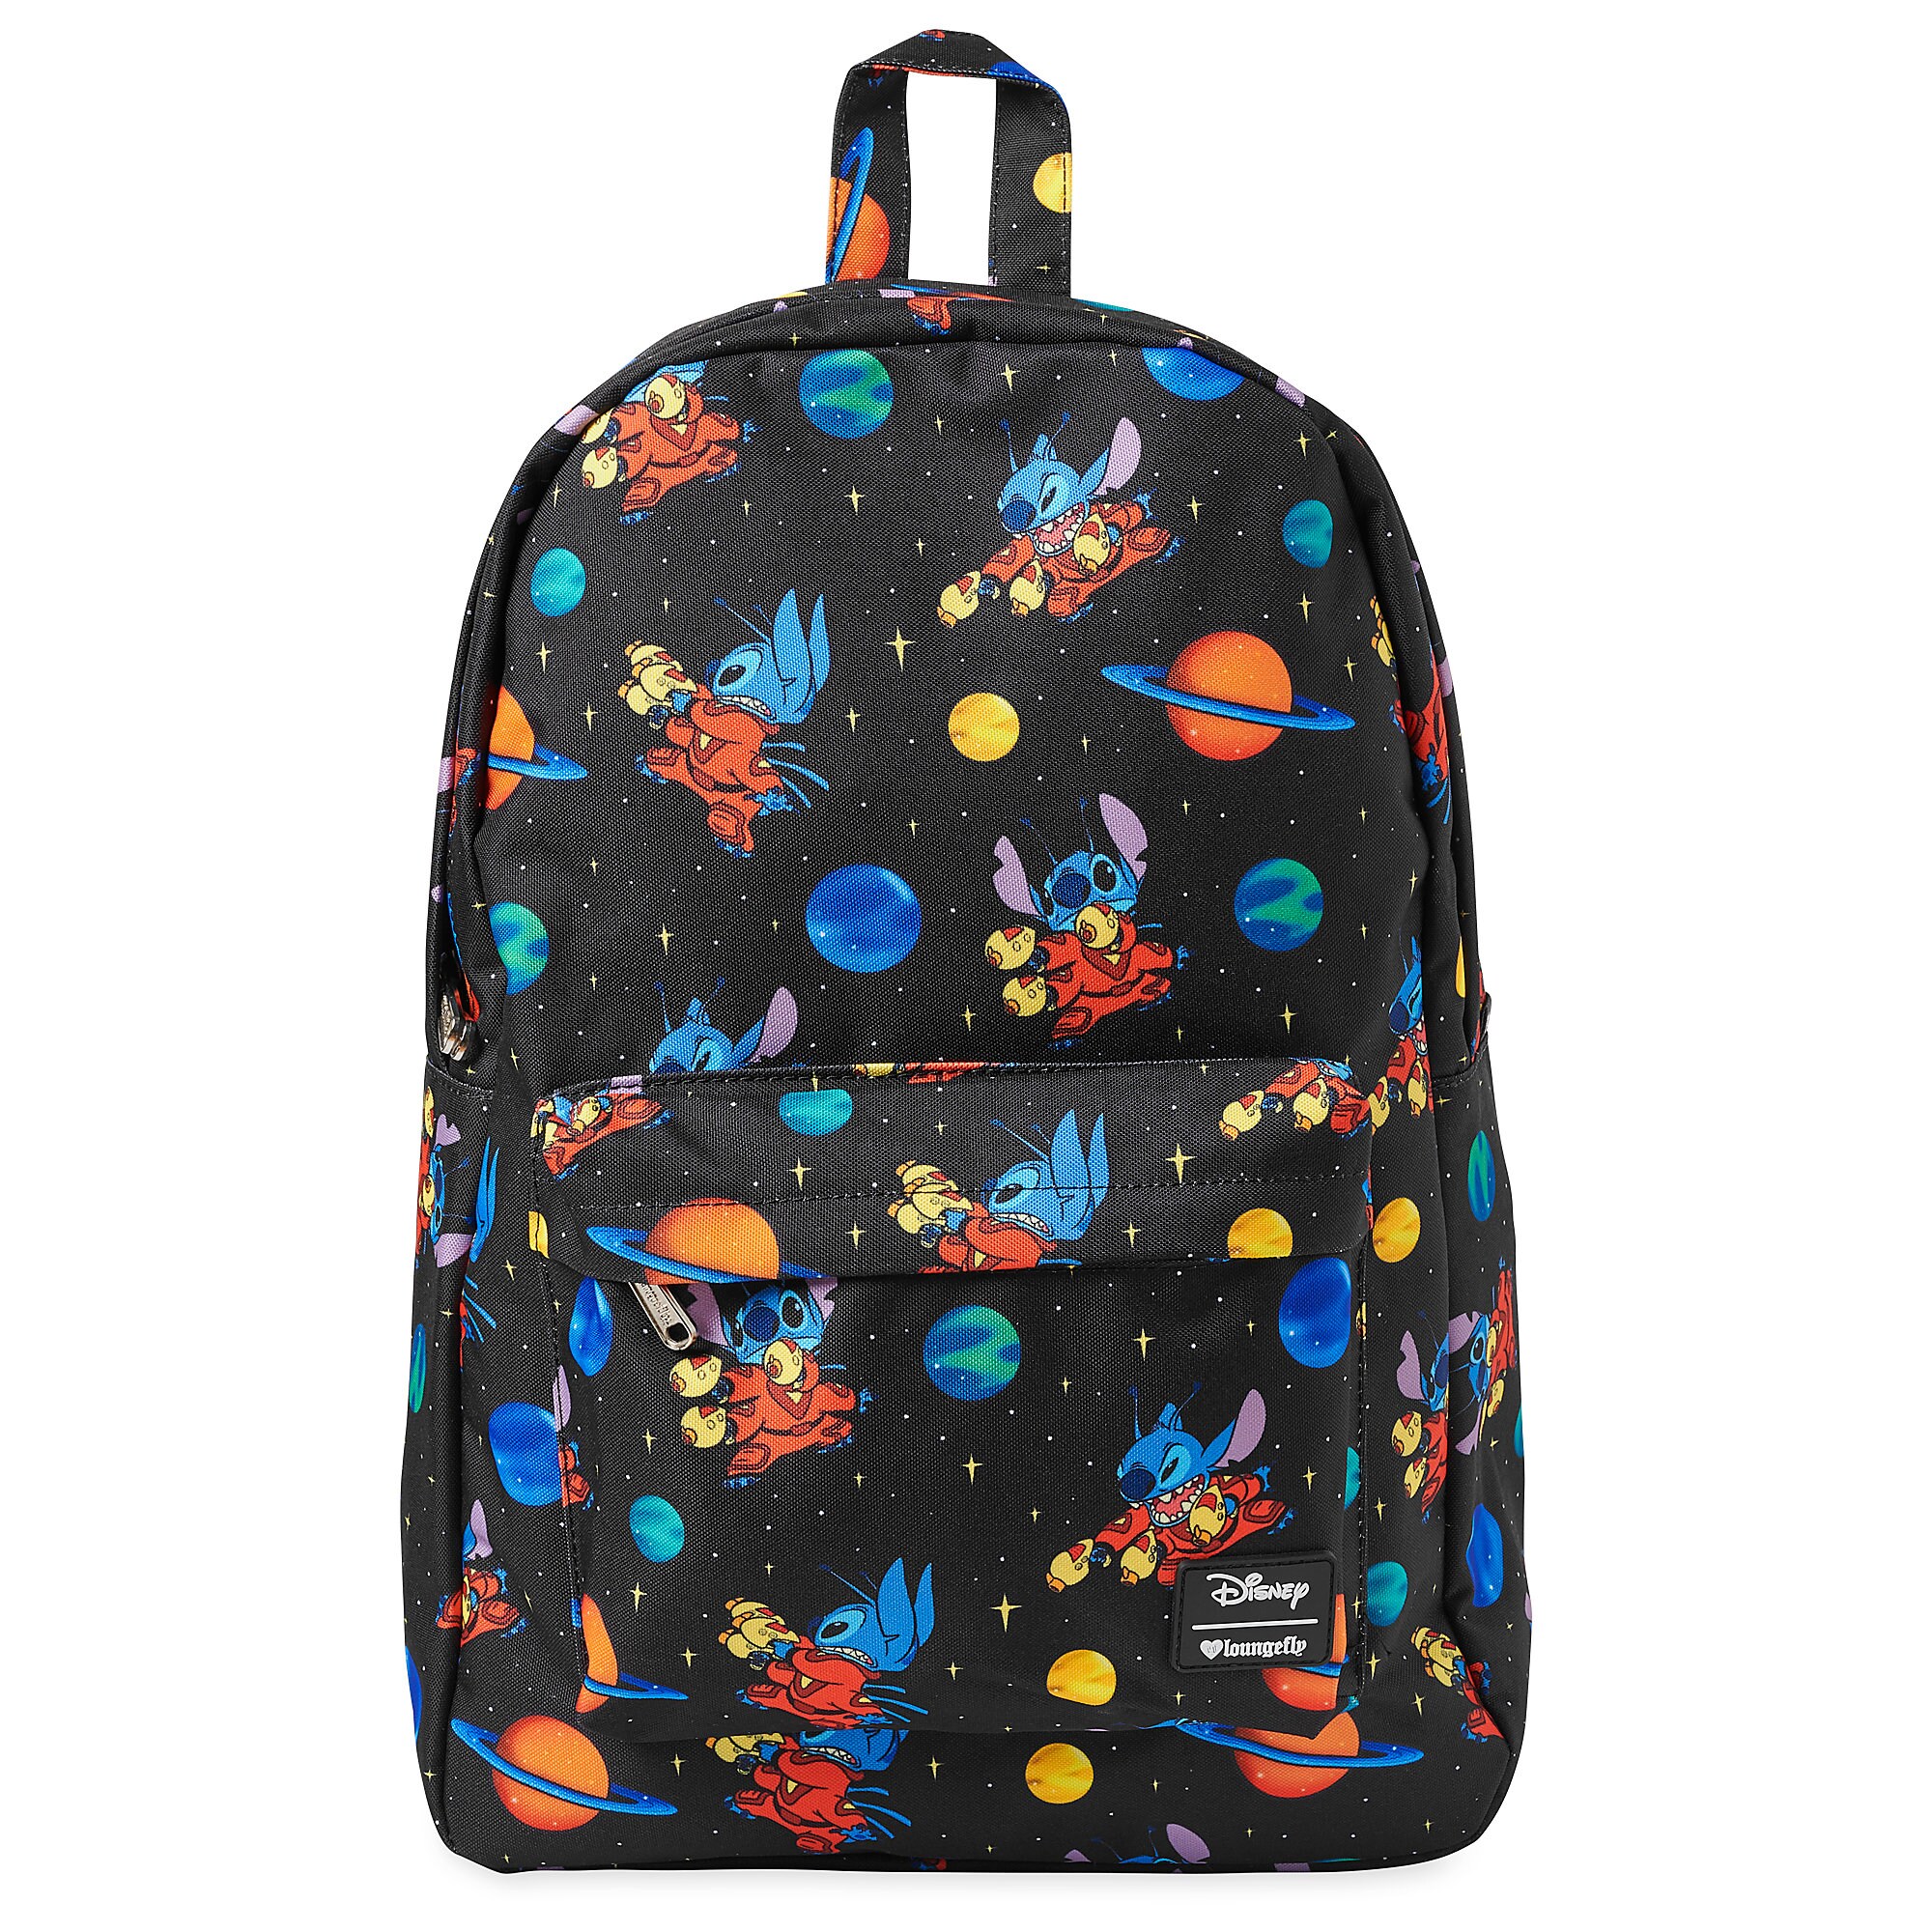 Stitch Backpack by Loungefly